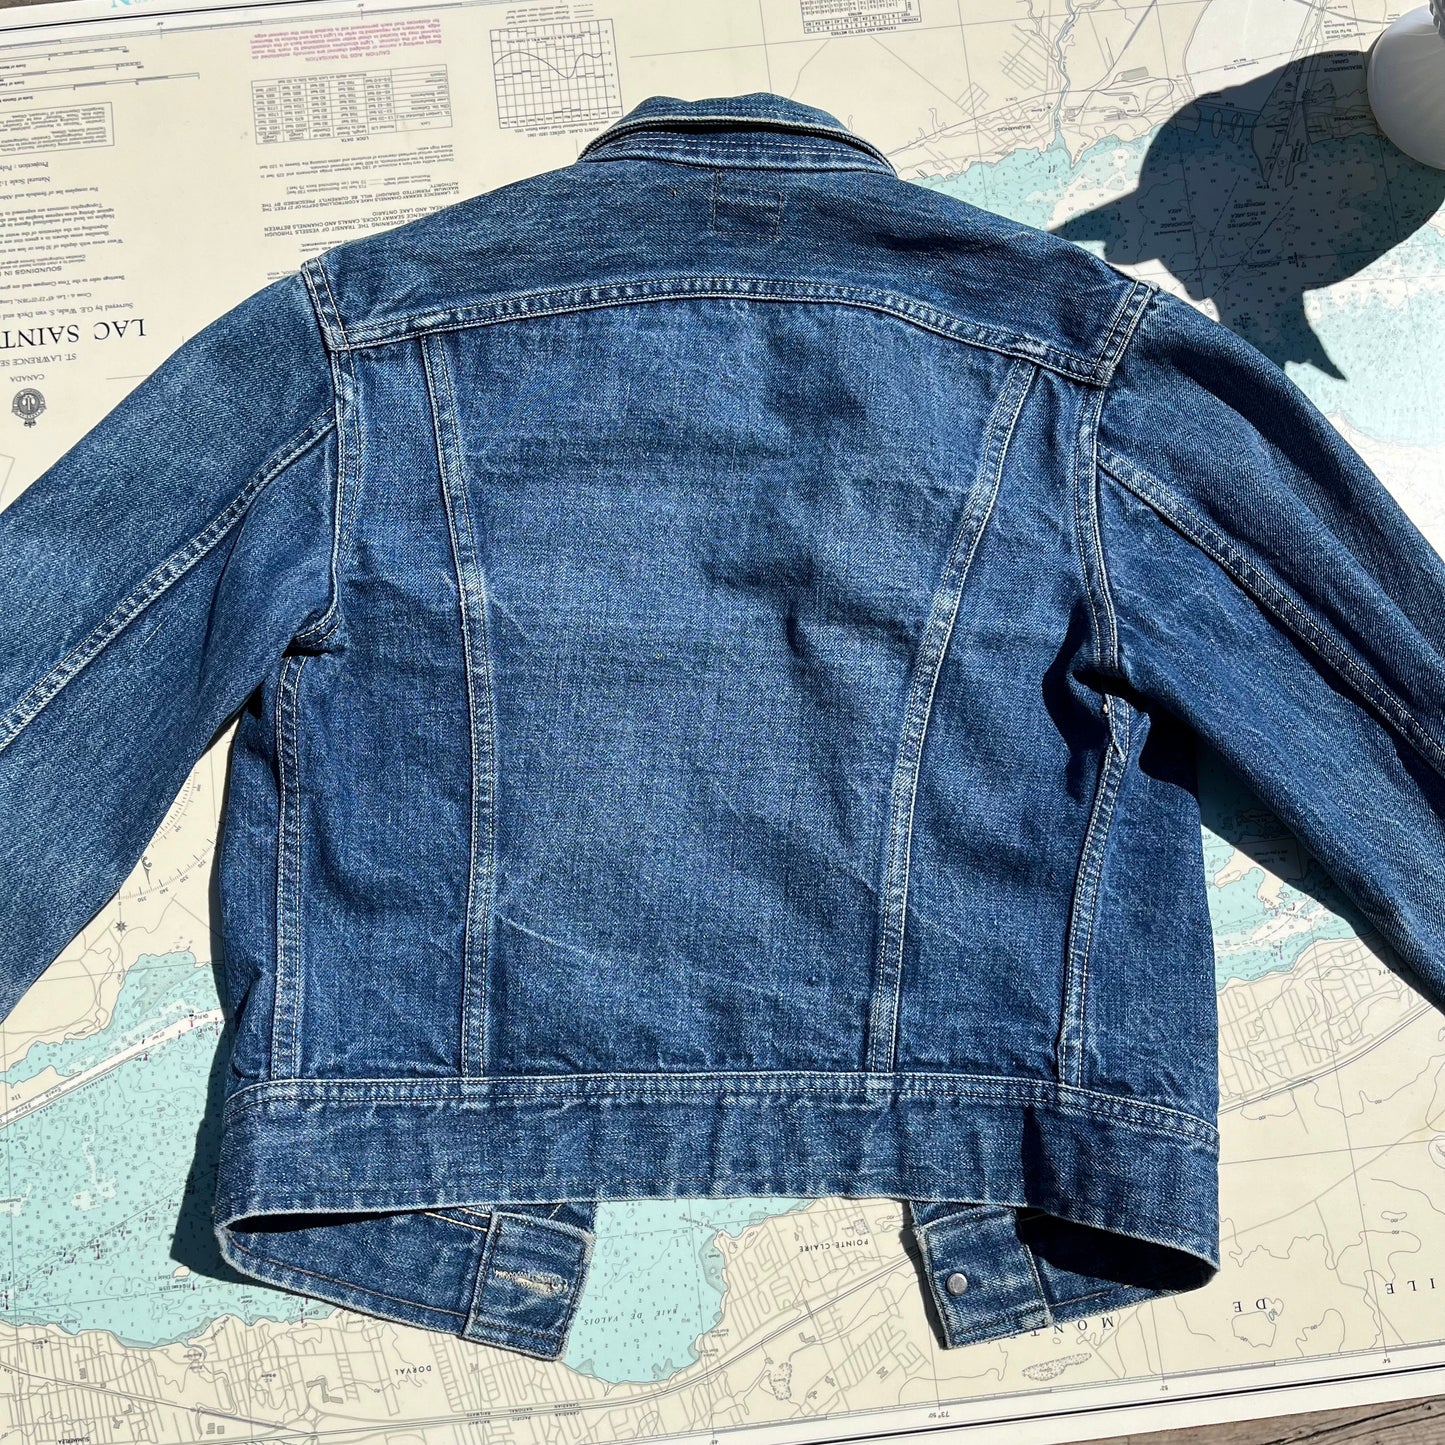 Vintage '90s Lee Jean Jacket with Embroidery